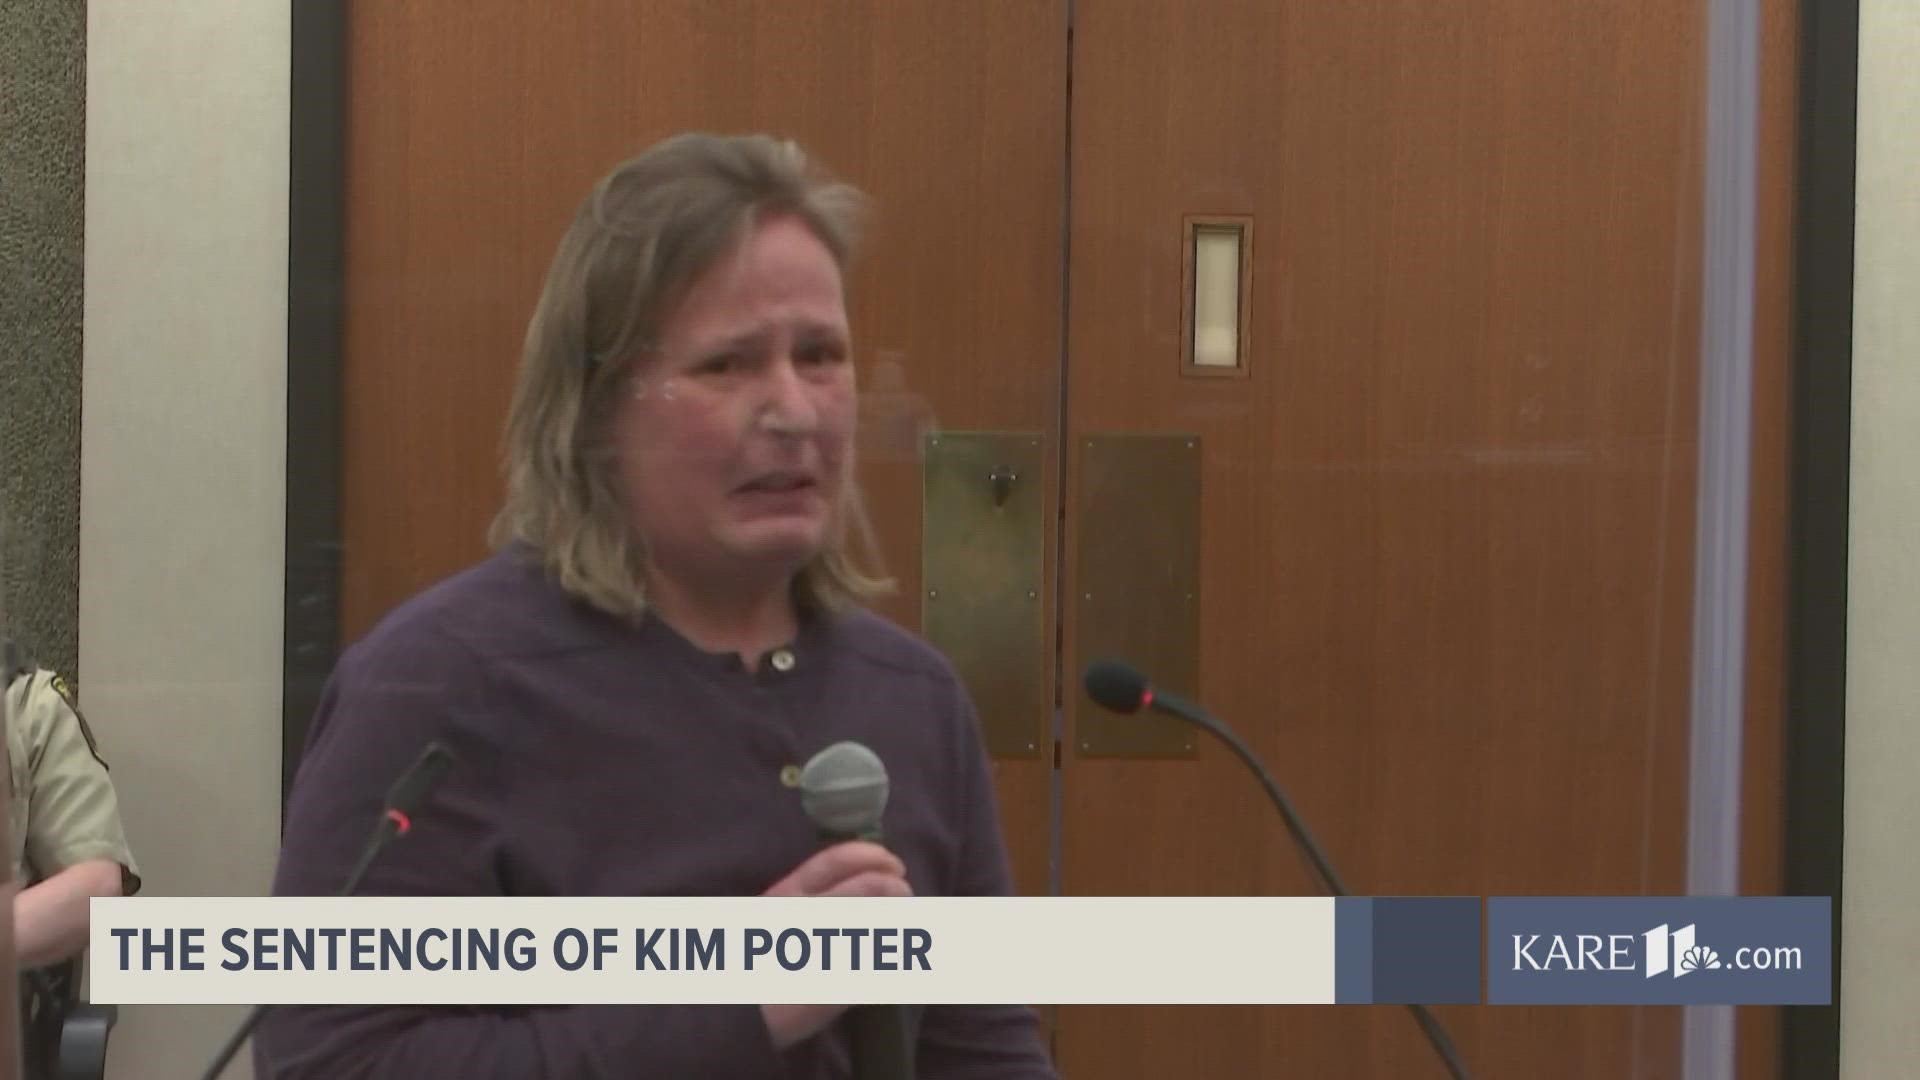 Former officer Kim Potter apologized to the family of Daunte Wright and the community of Brooklyn Center in the moments before she was sentenced.